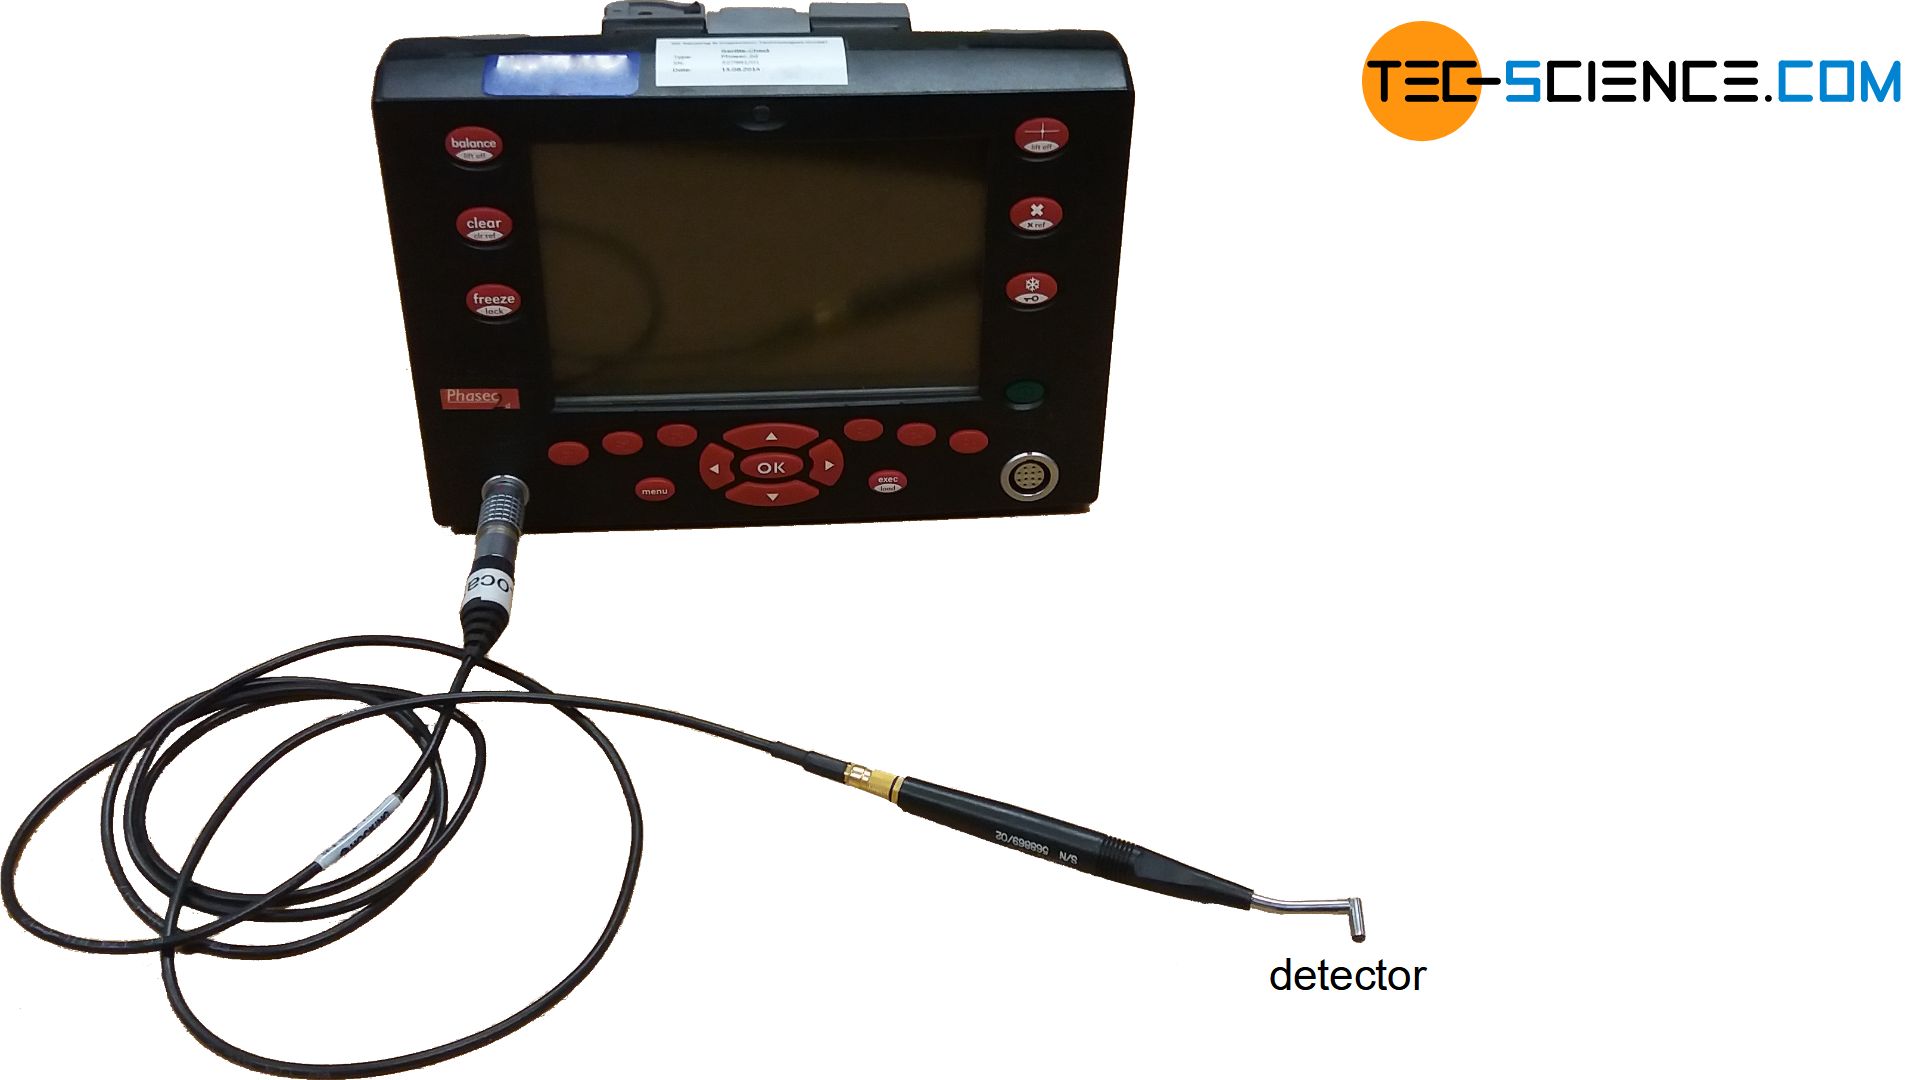 Measuring tool for eddy current testing